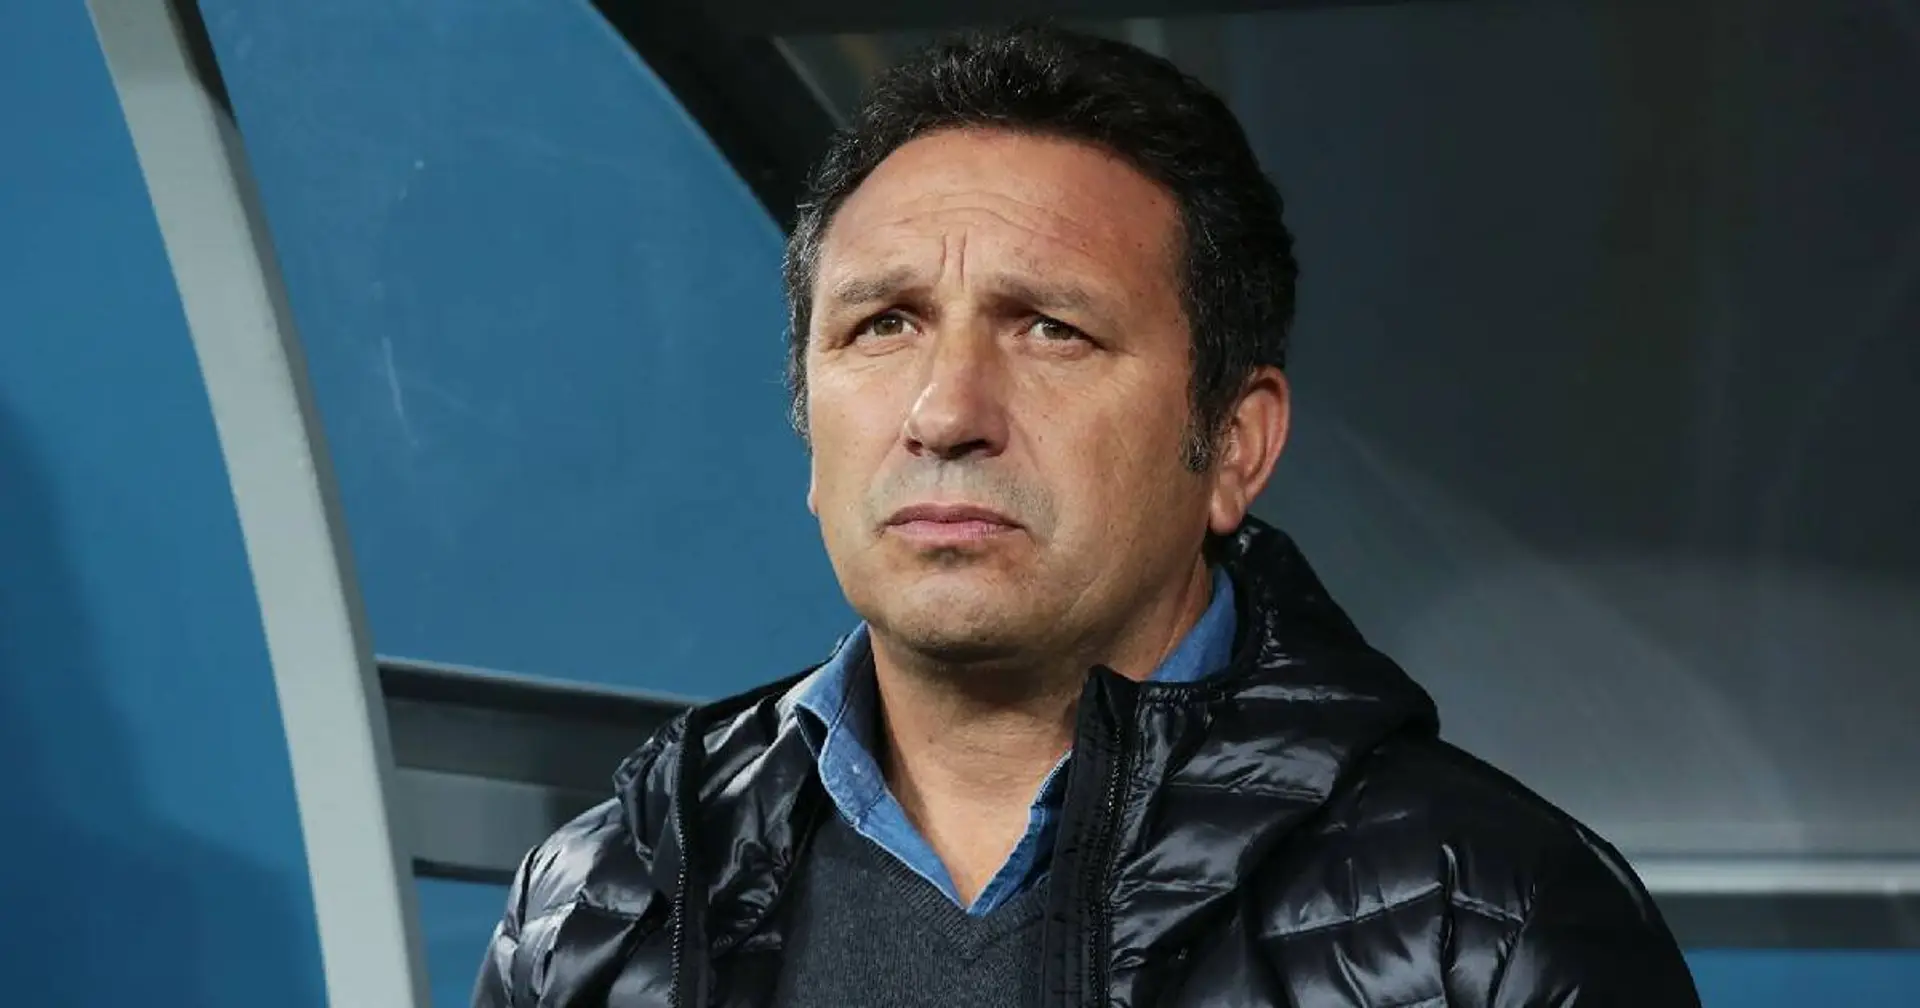 Ex-Barca player and coach Eusebio in induced coma after urgent brain surgery